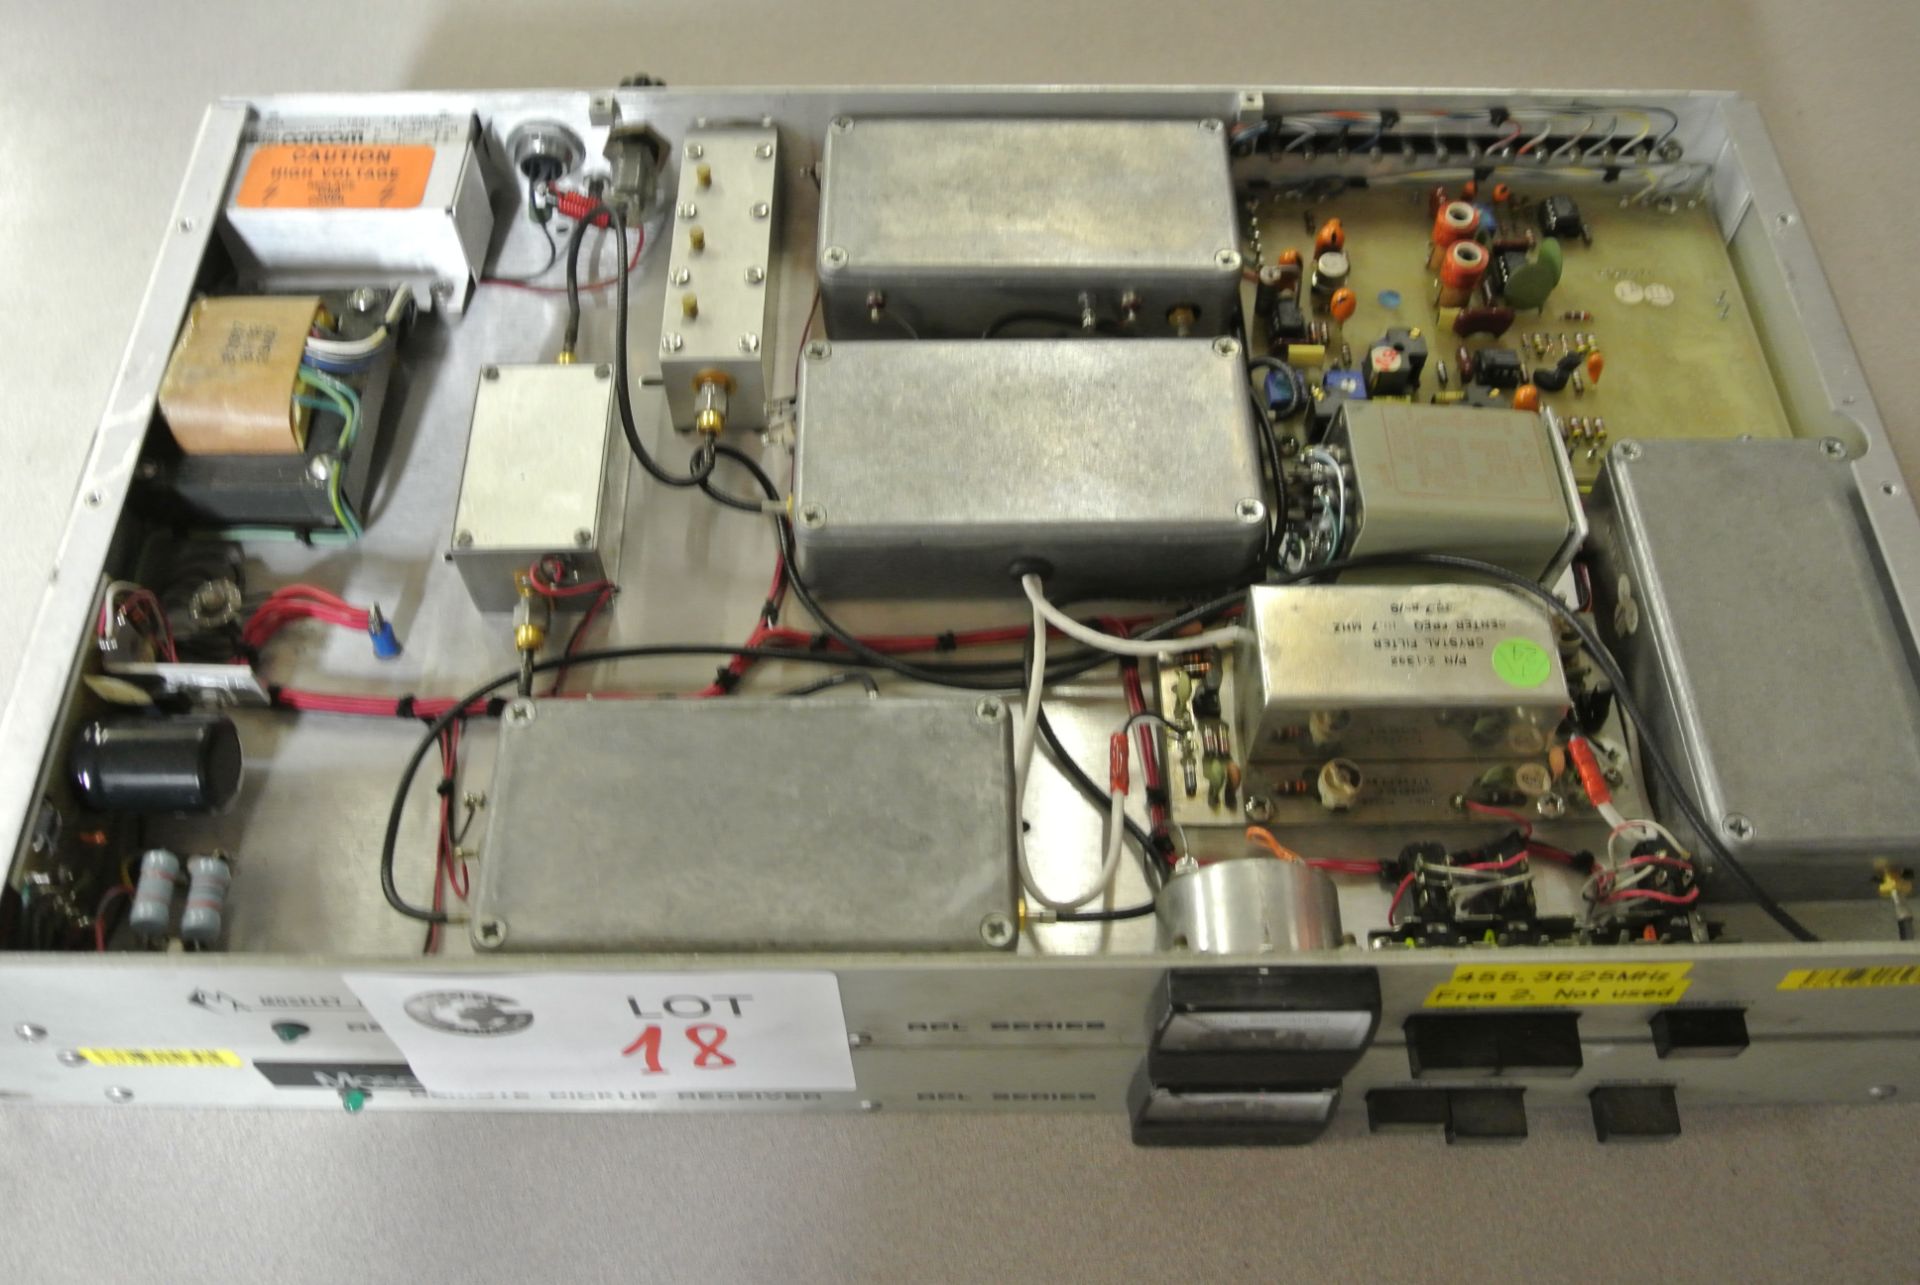 2 x Moseley Associates Inc. Remote Pickup Receiver RPL Series RPL-4C - Vintage Broadcast Receivers - Image 4 of 6